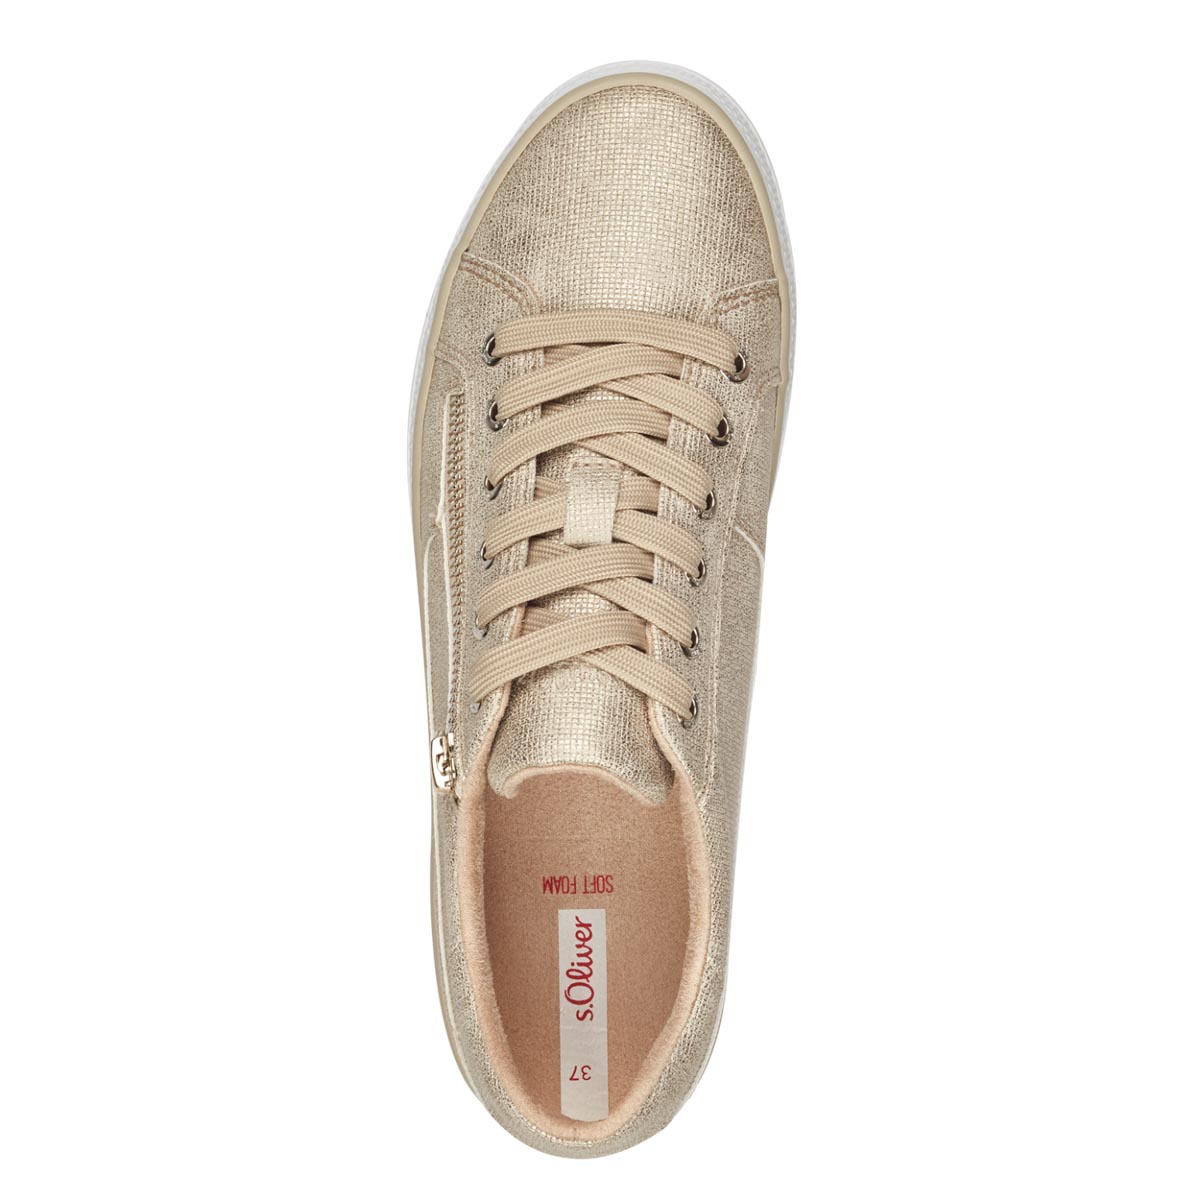  4. Top view of S.Oliver Gold-Taupe Sneakers, focusing on the soft golden taupe laces and elegant design.